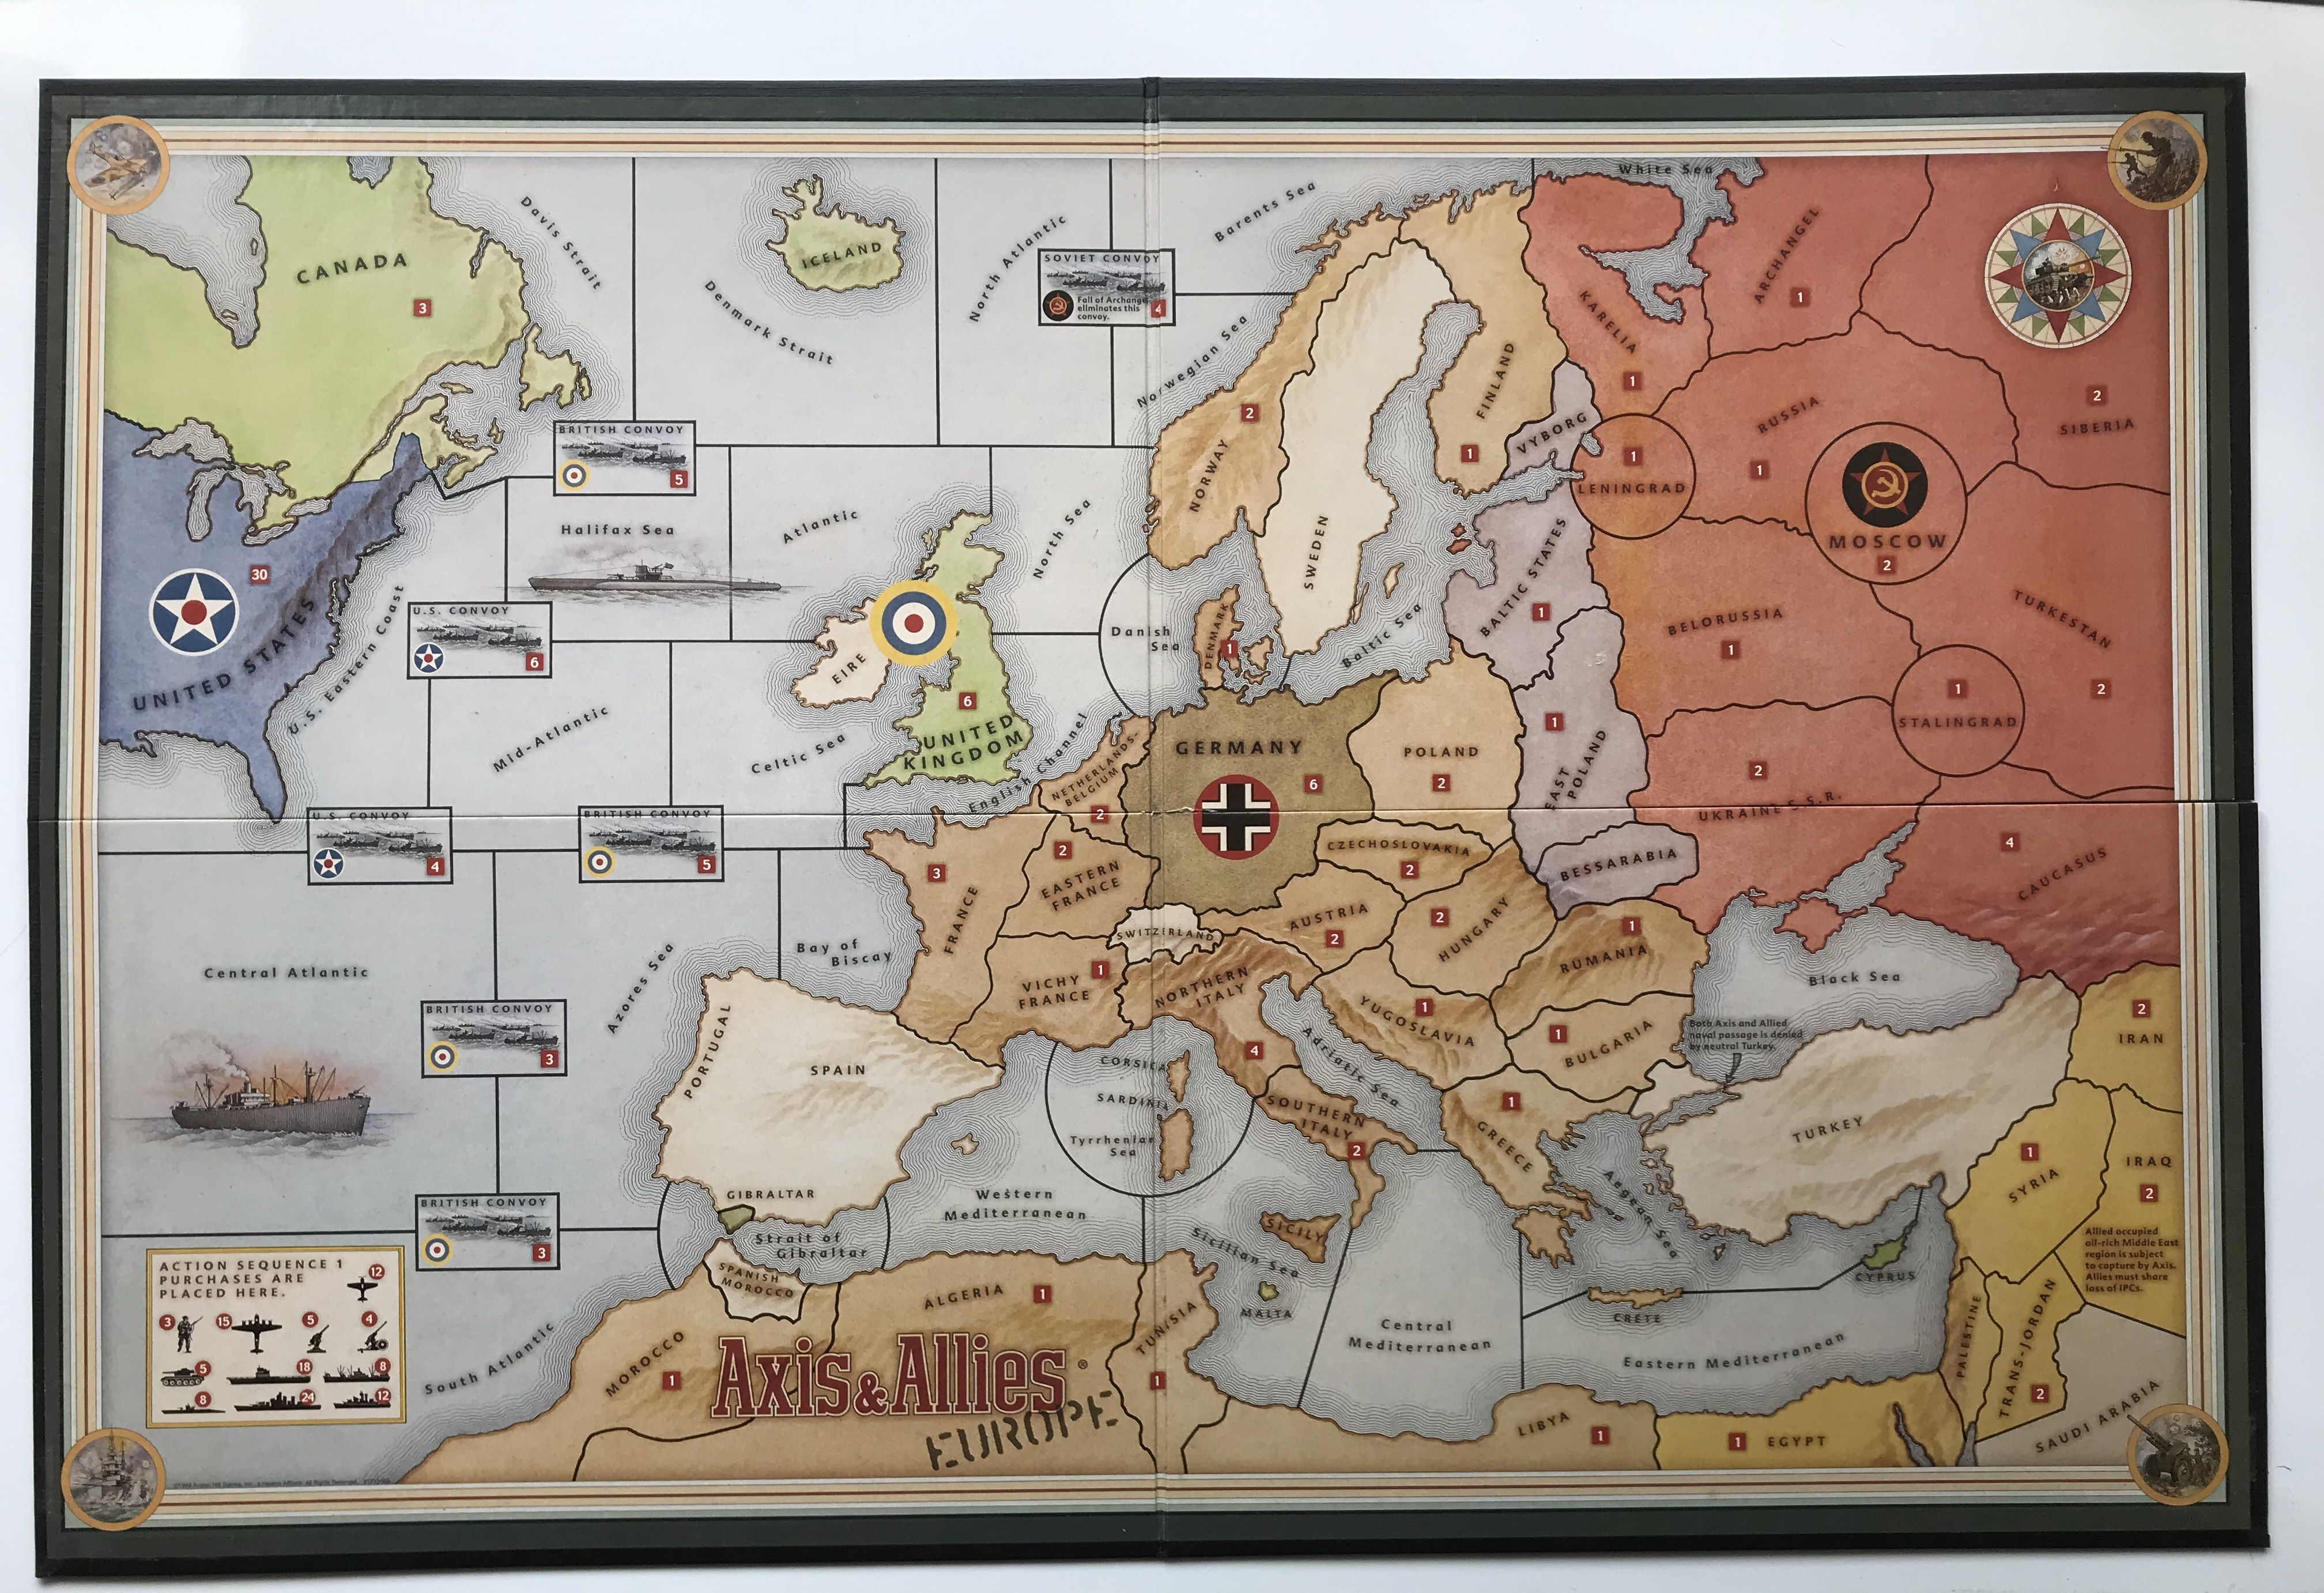 Product Details | Axis & Allies: Europe | GeekMarket